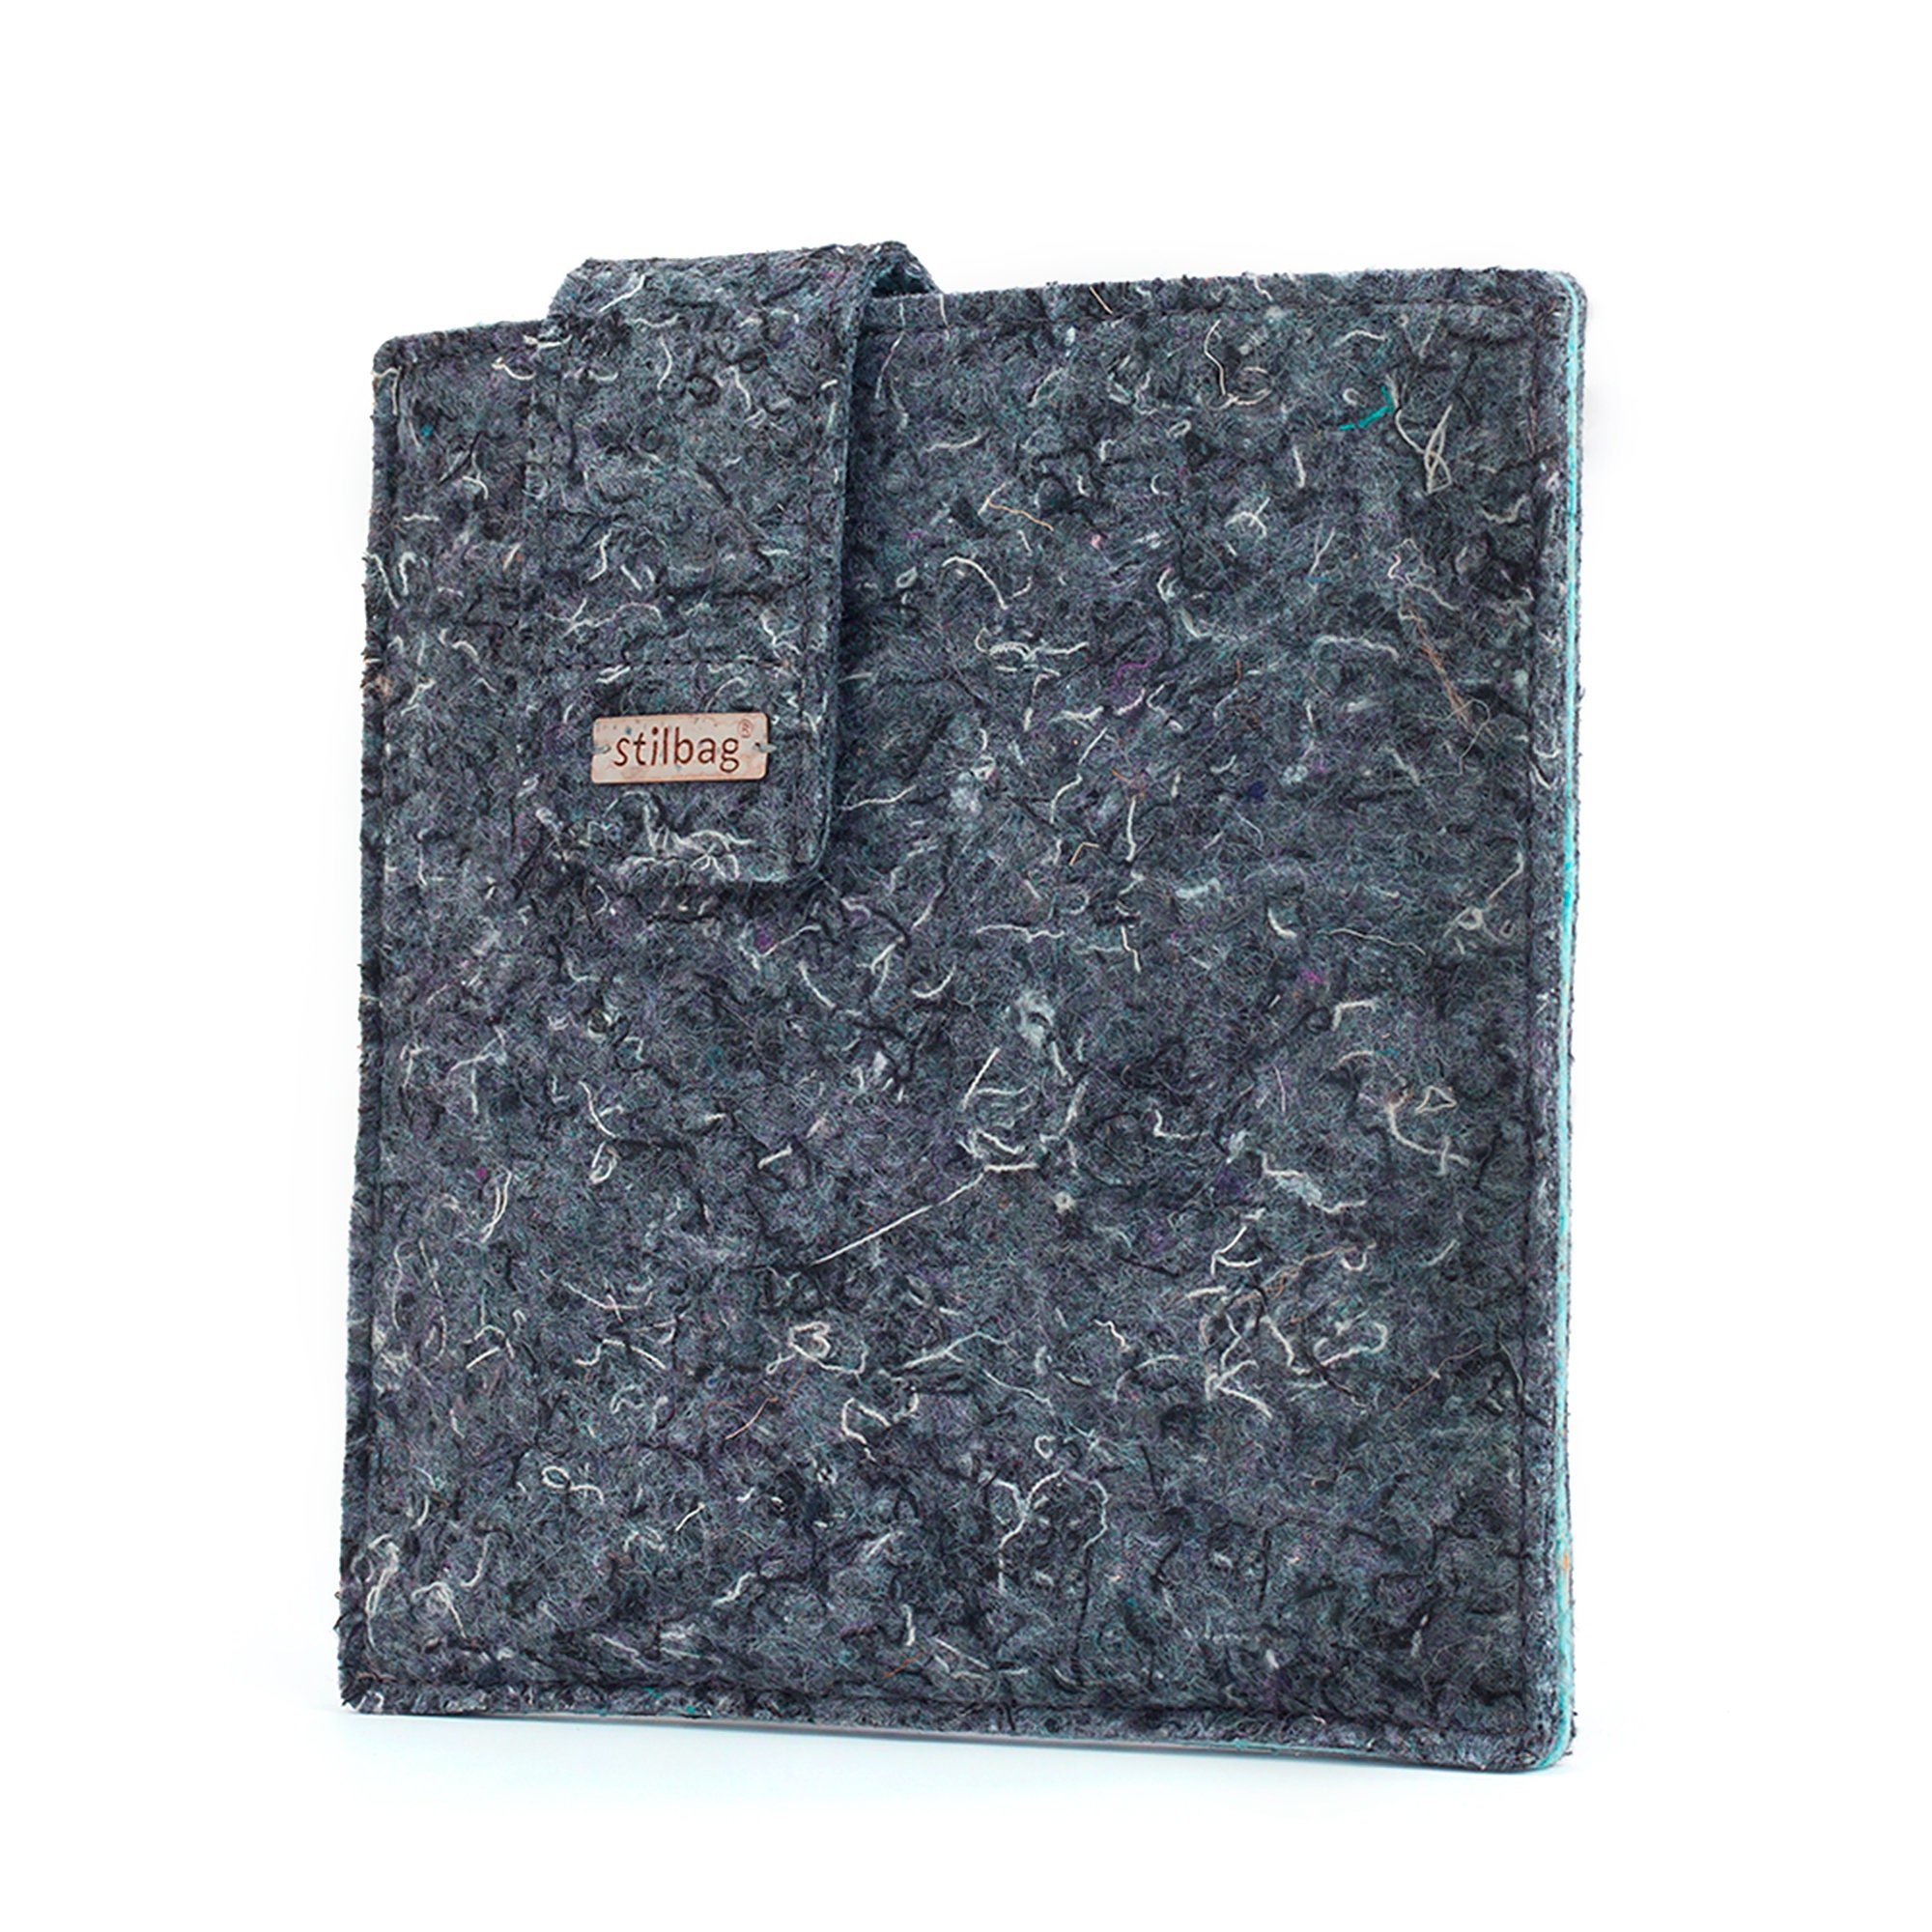 Kindle Case sustainably made from upcycled fleece – Refleece